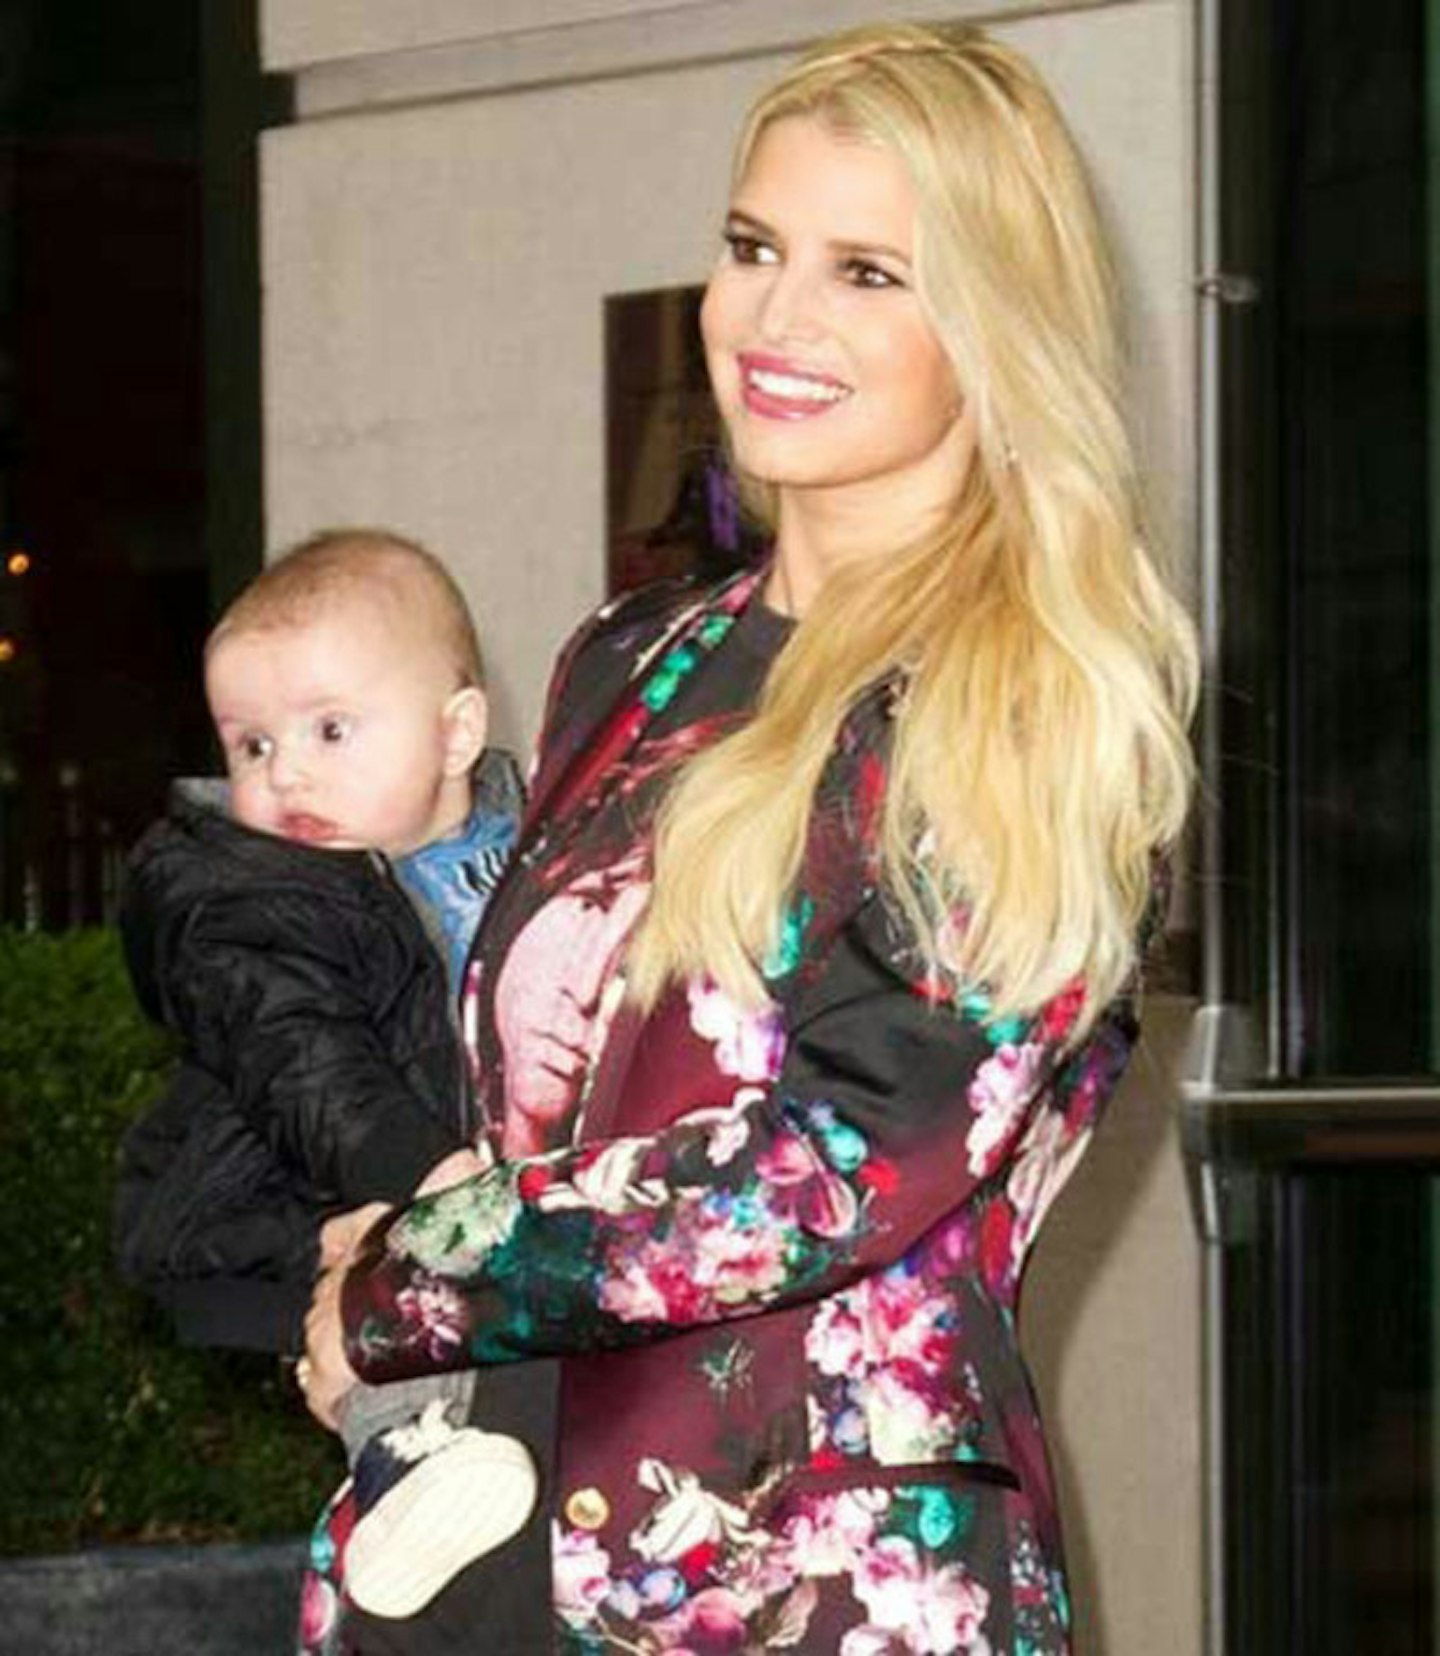 June 2013: Jessica Simpson welcomed son Ace